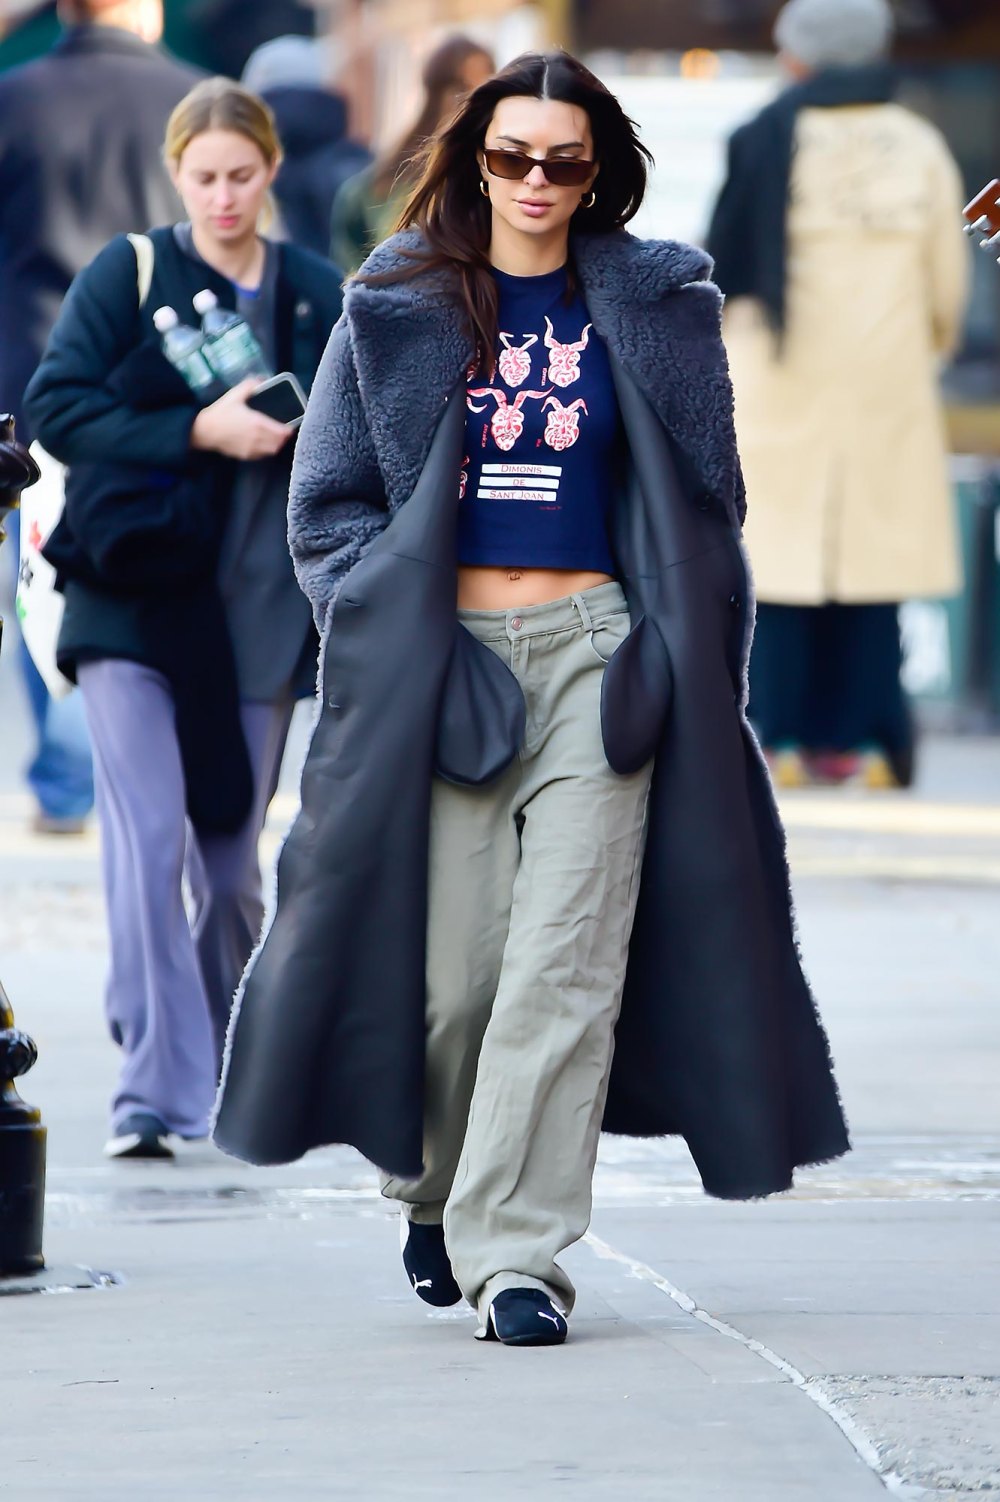 Emily Ratajkowski Pairs a Crop Top With a Sheepskin Coat in NYC